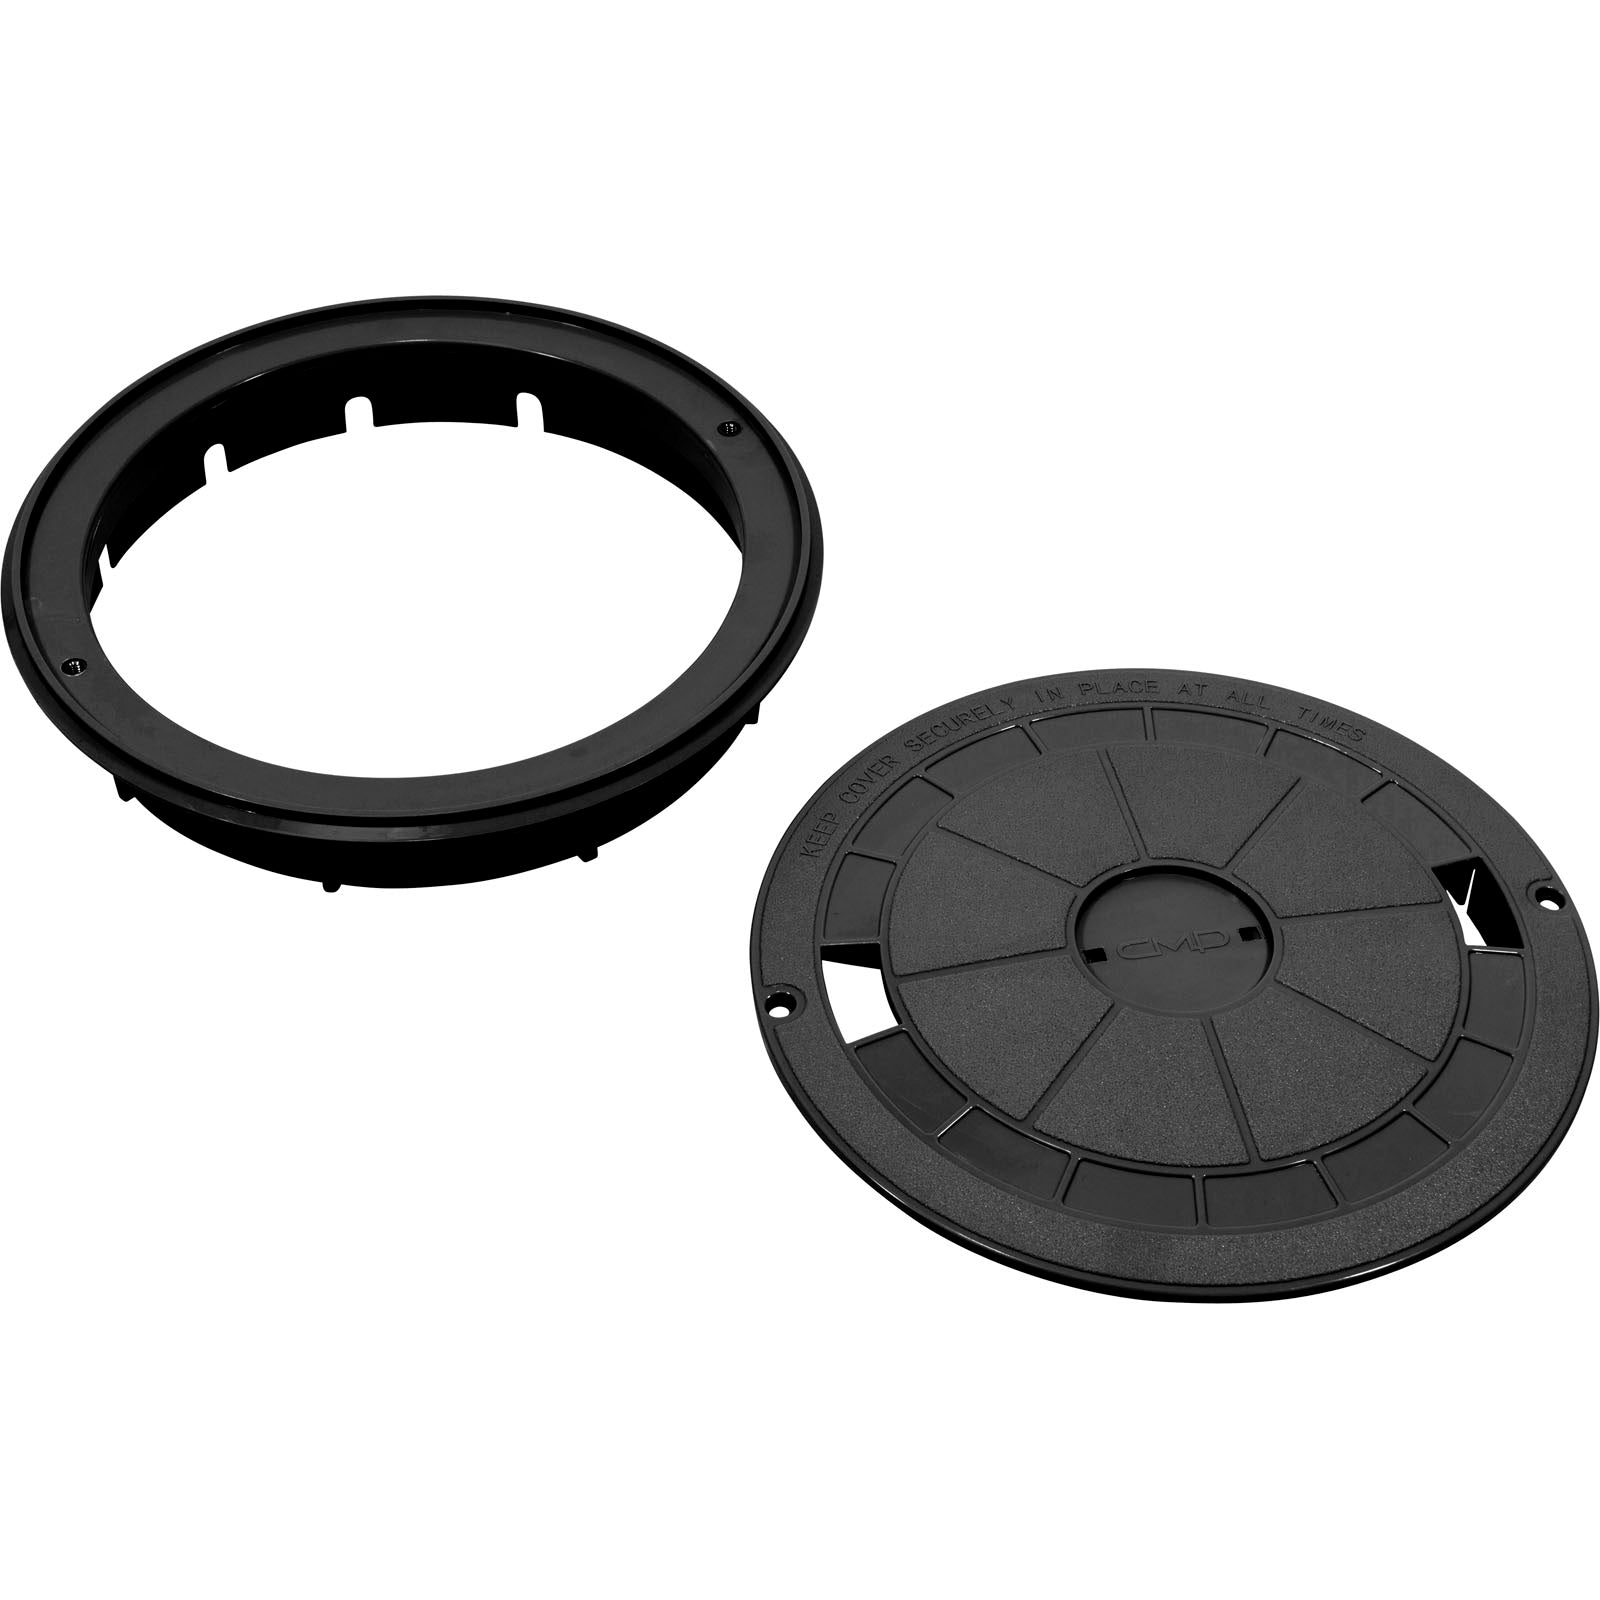 Skimmer Cover And Collar (Round) Black/ 25544-904-000